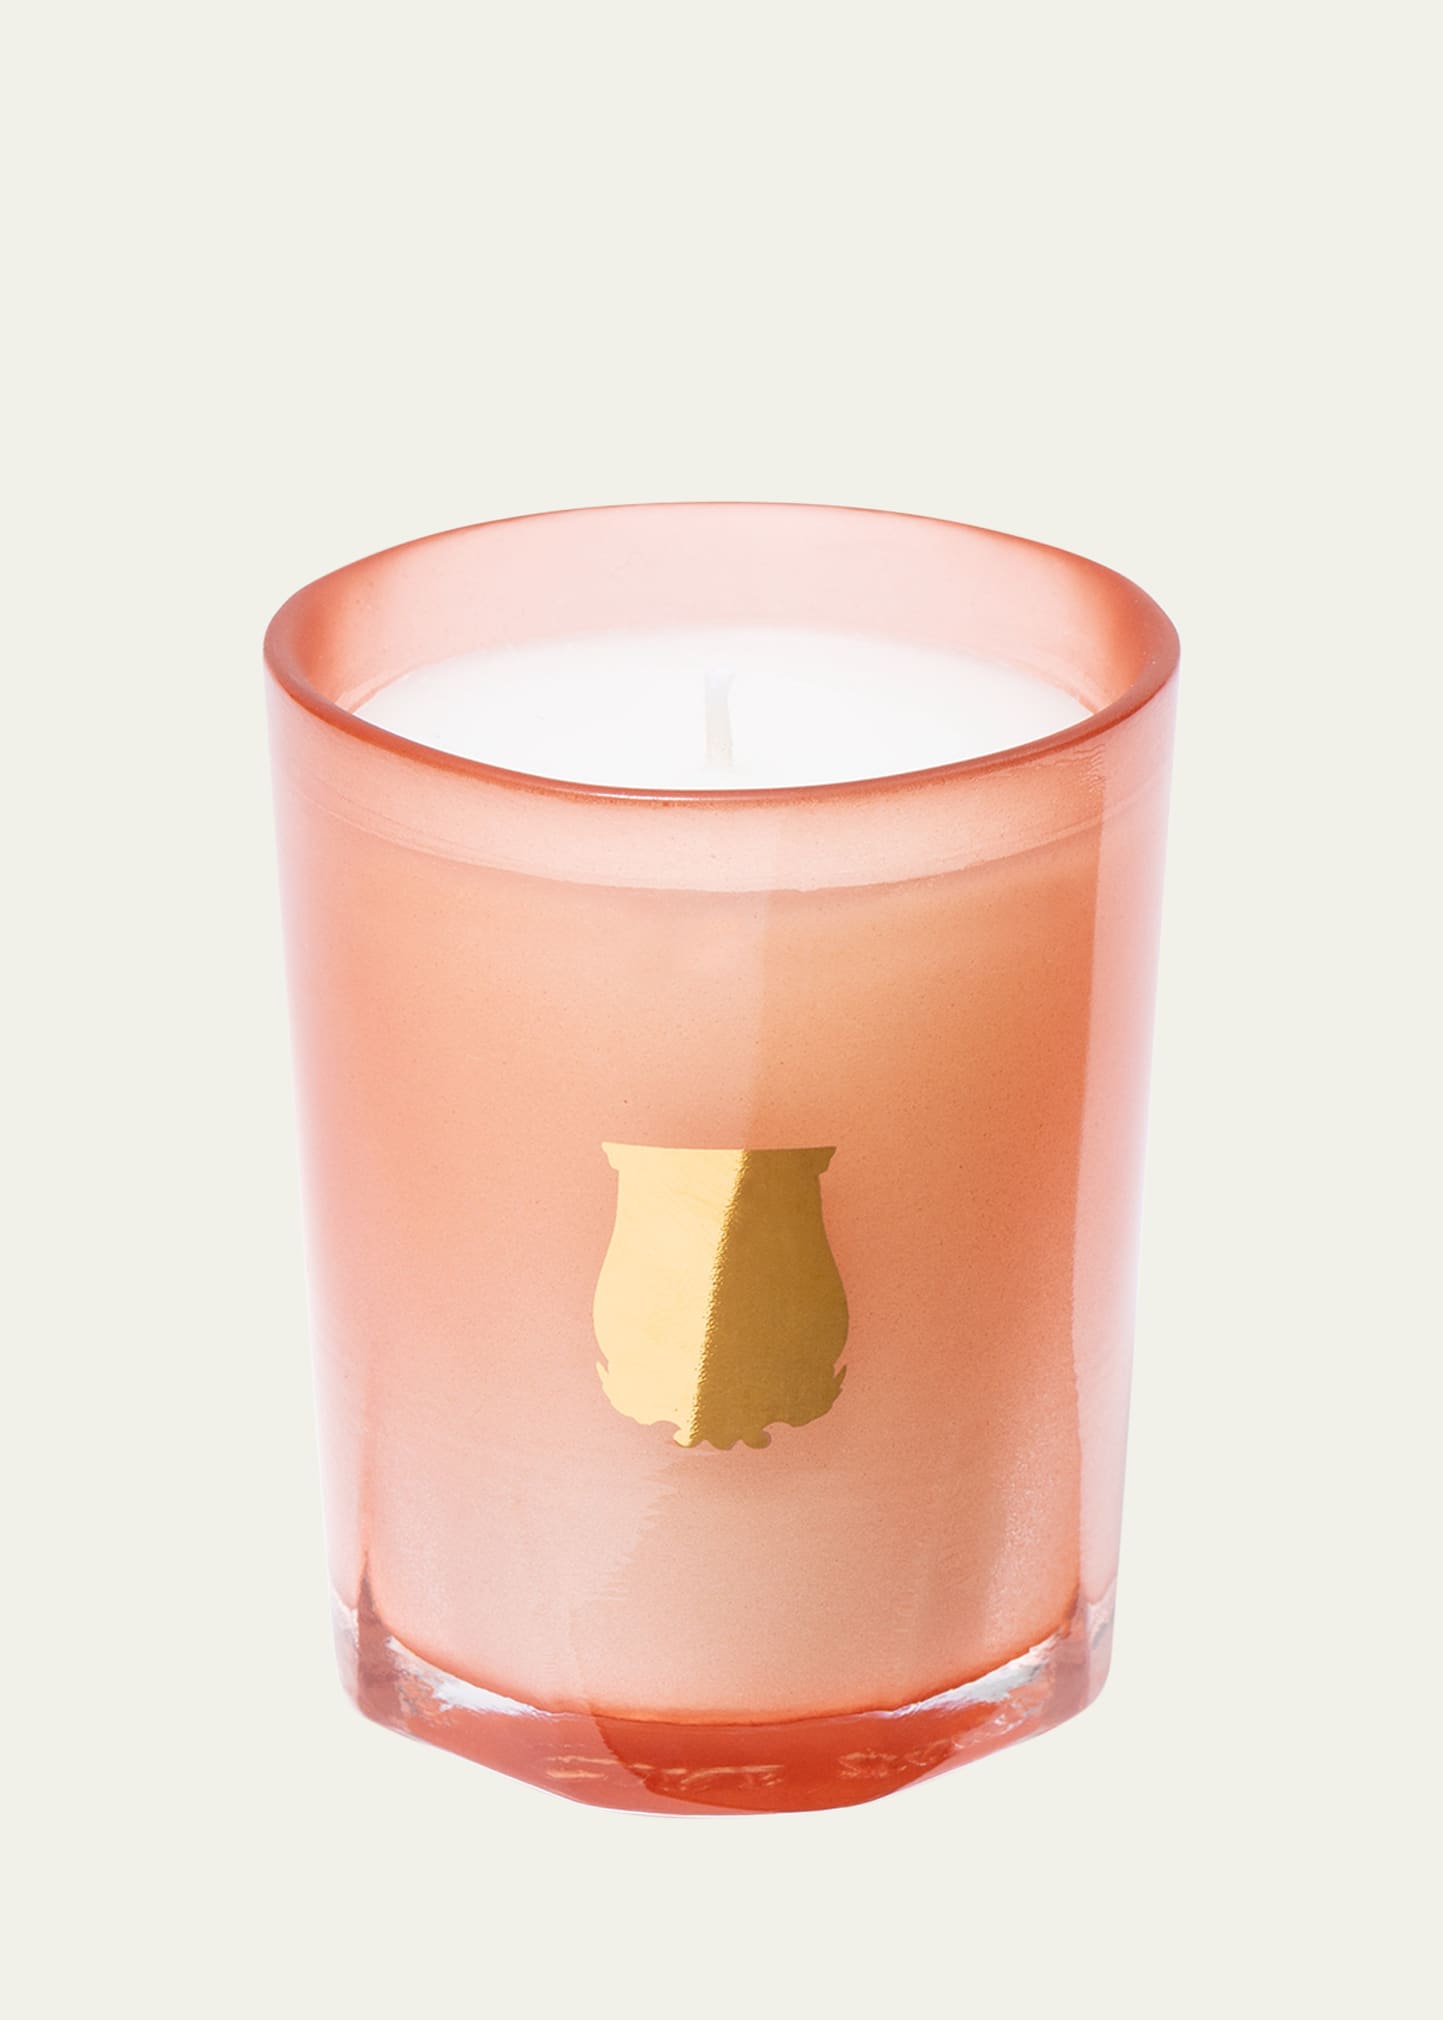 Trudon Tuileries Scented Candle, 2.4 Oz.